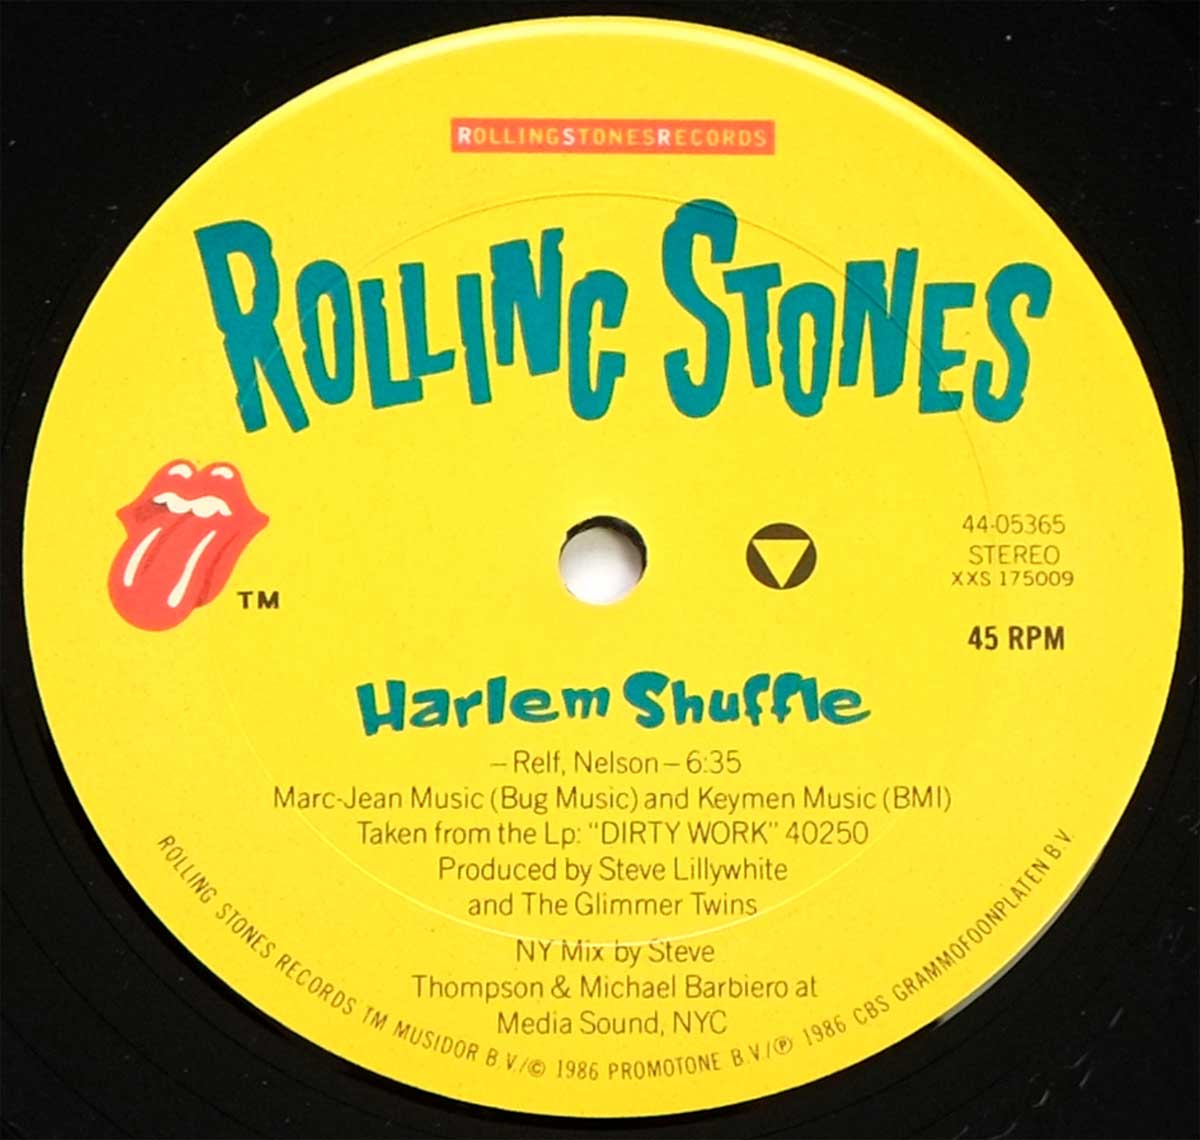 Close-up Photo of "ROLLING STONES HARLEM SHUFFLE" Record Label